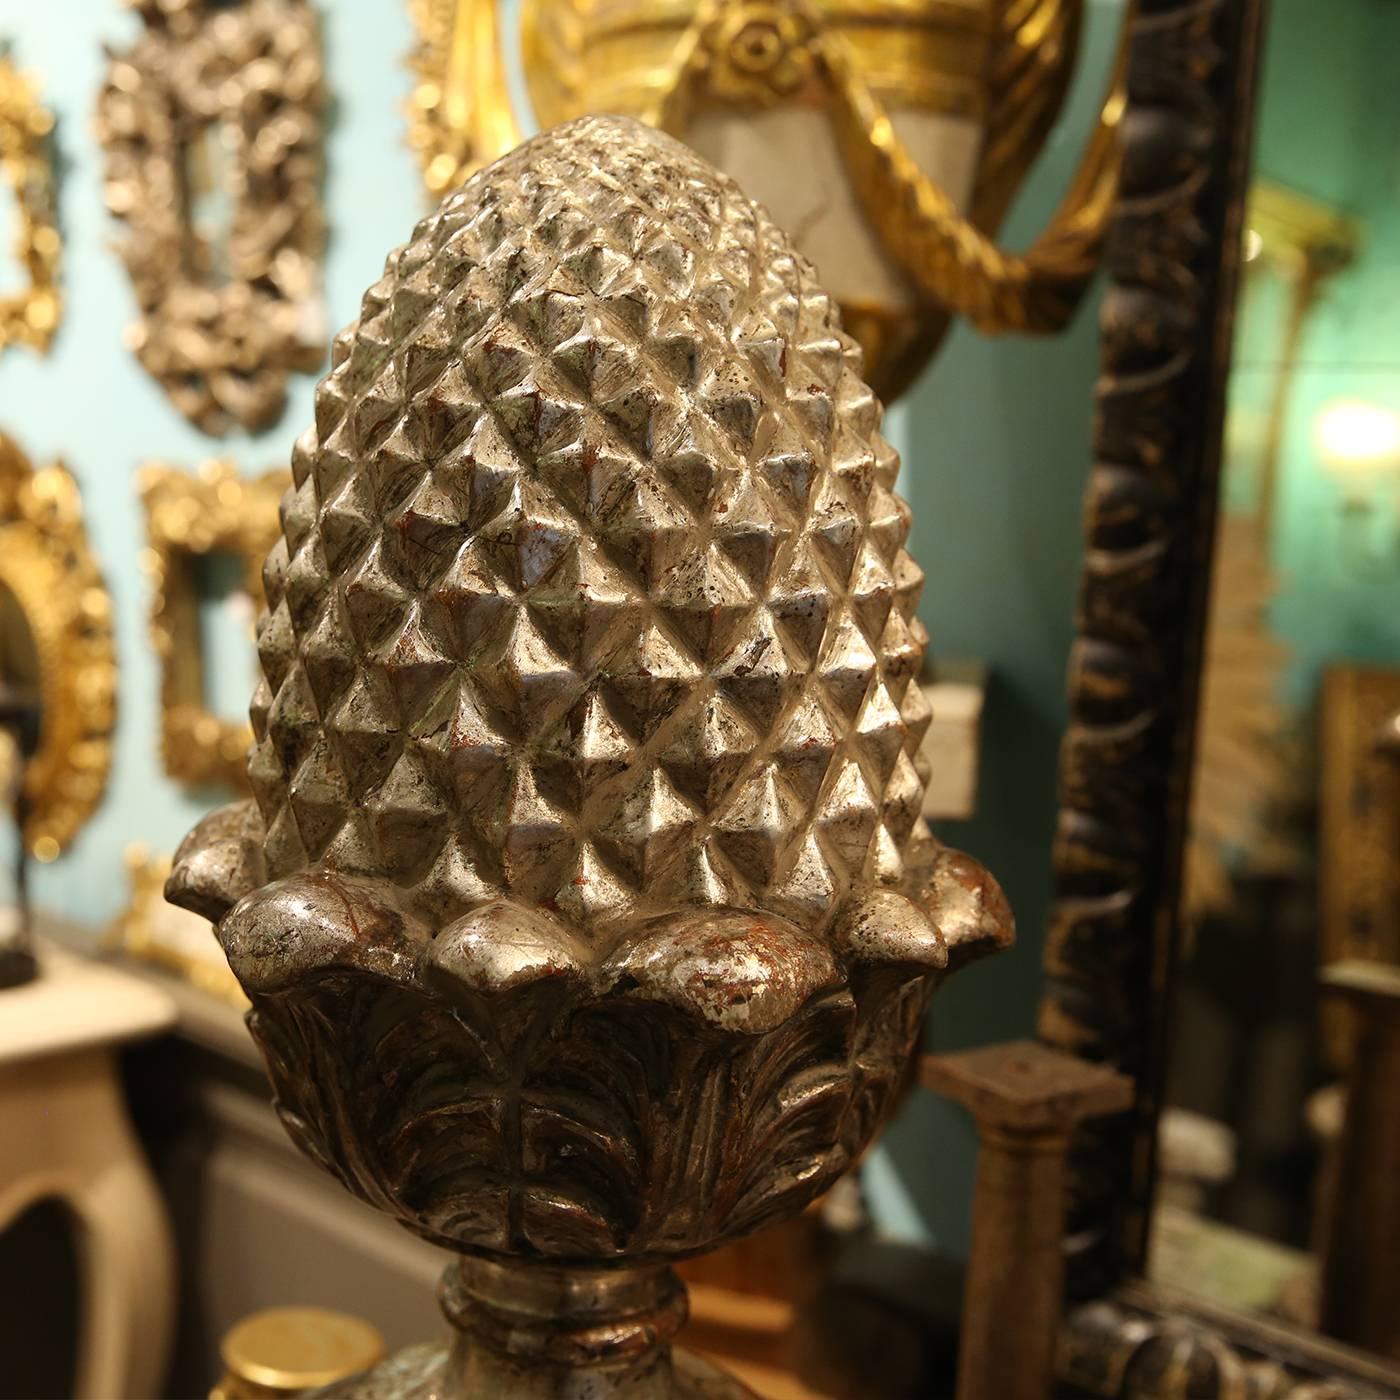 This is a one-off decorative pine-cone by Florentine carver Castorina. It is entirely hand-carved and embellished with pure silver leaf with an antique finish.